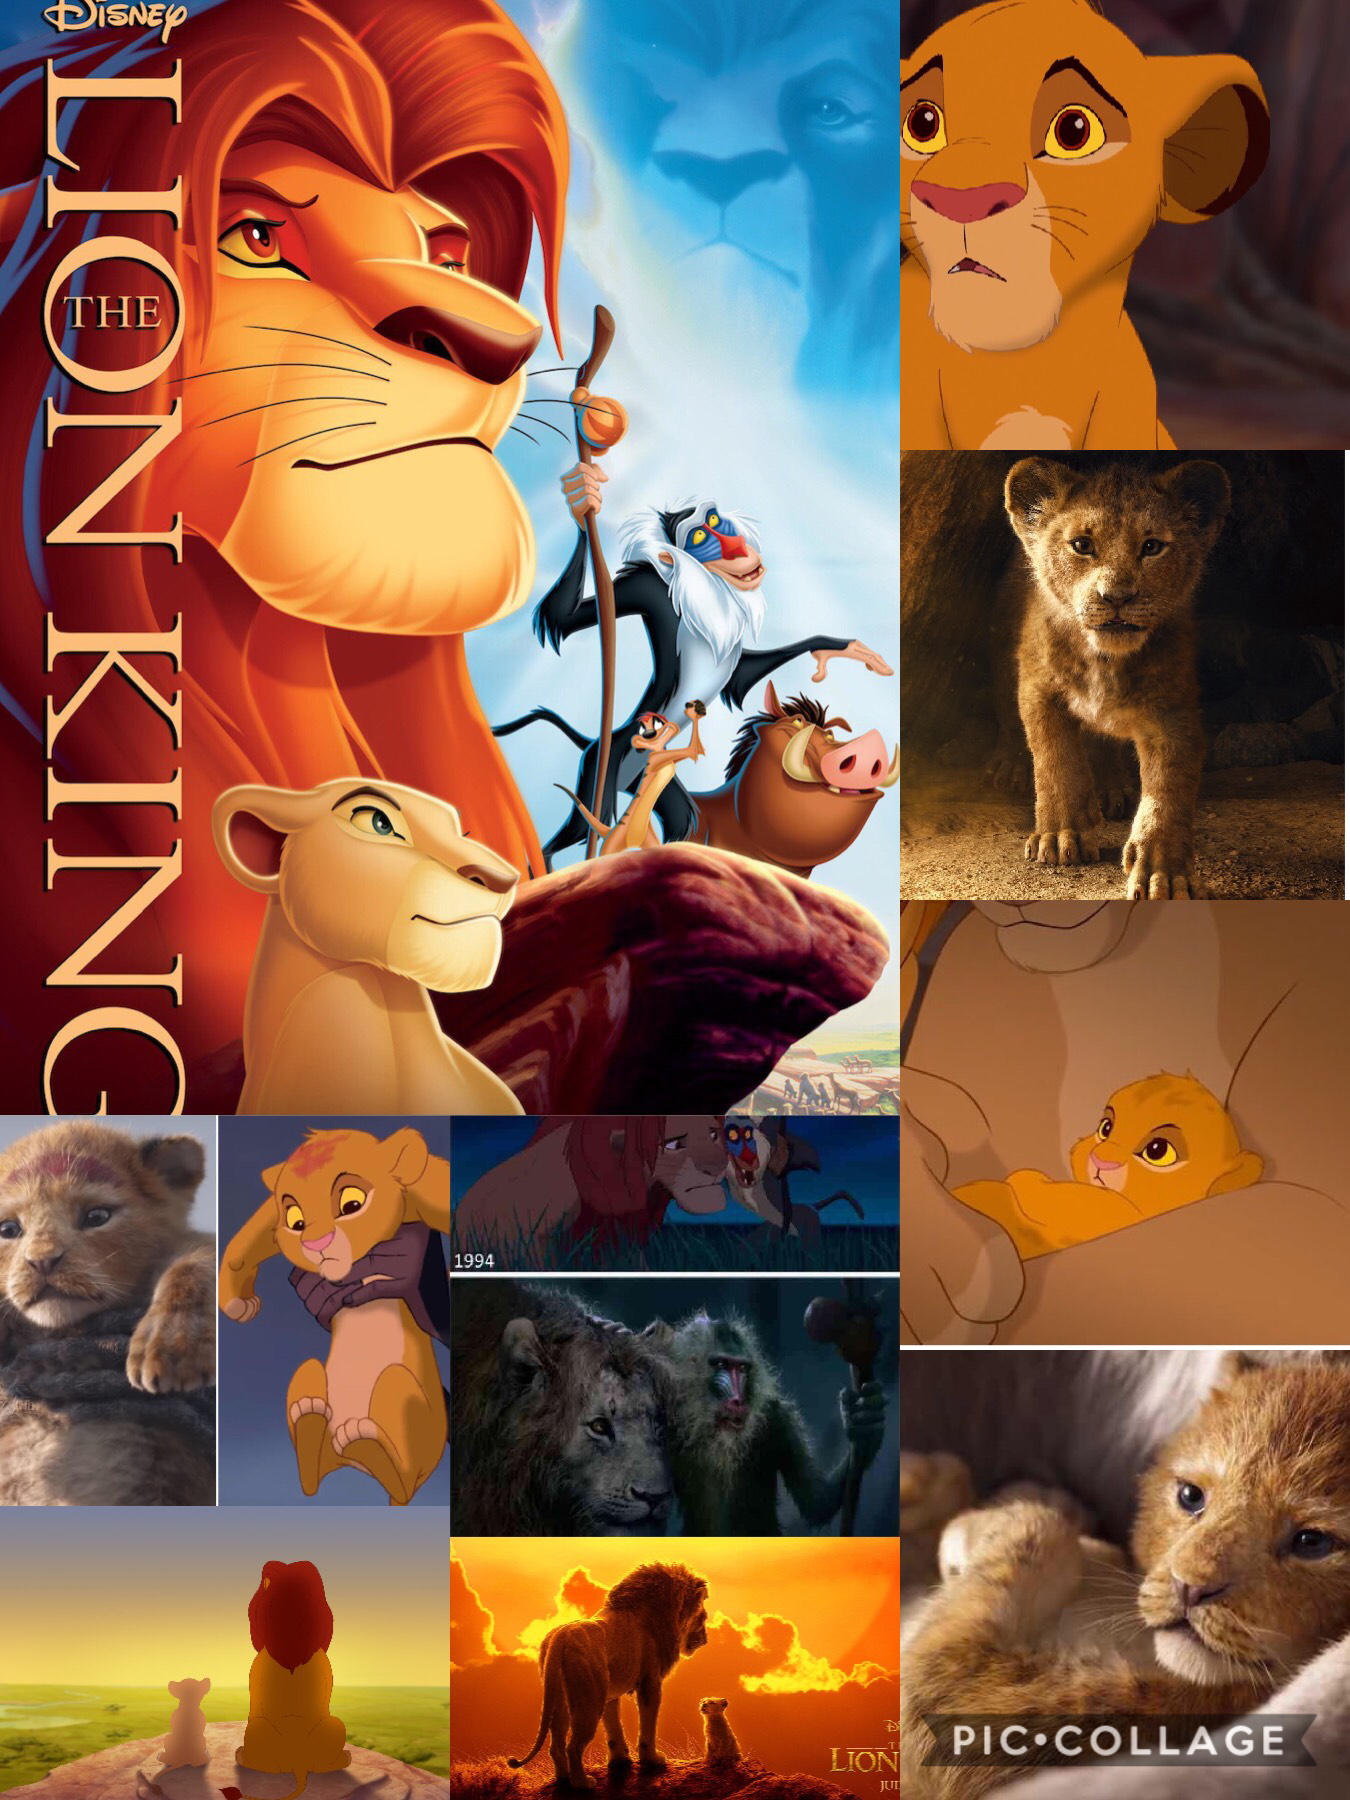 The Lion king 